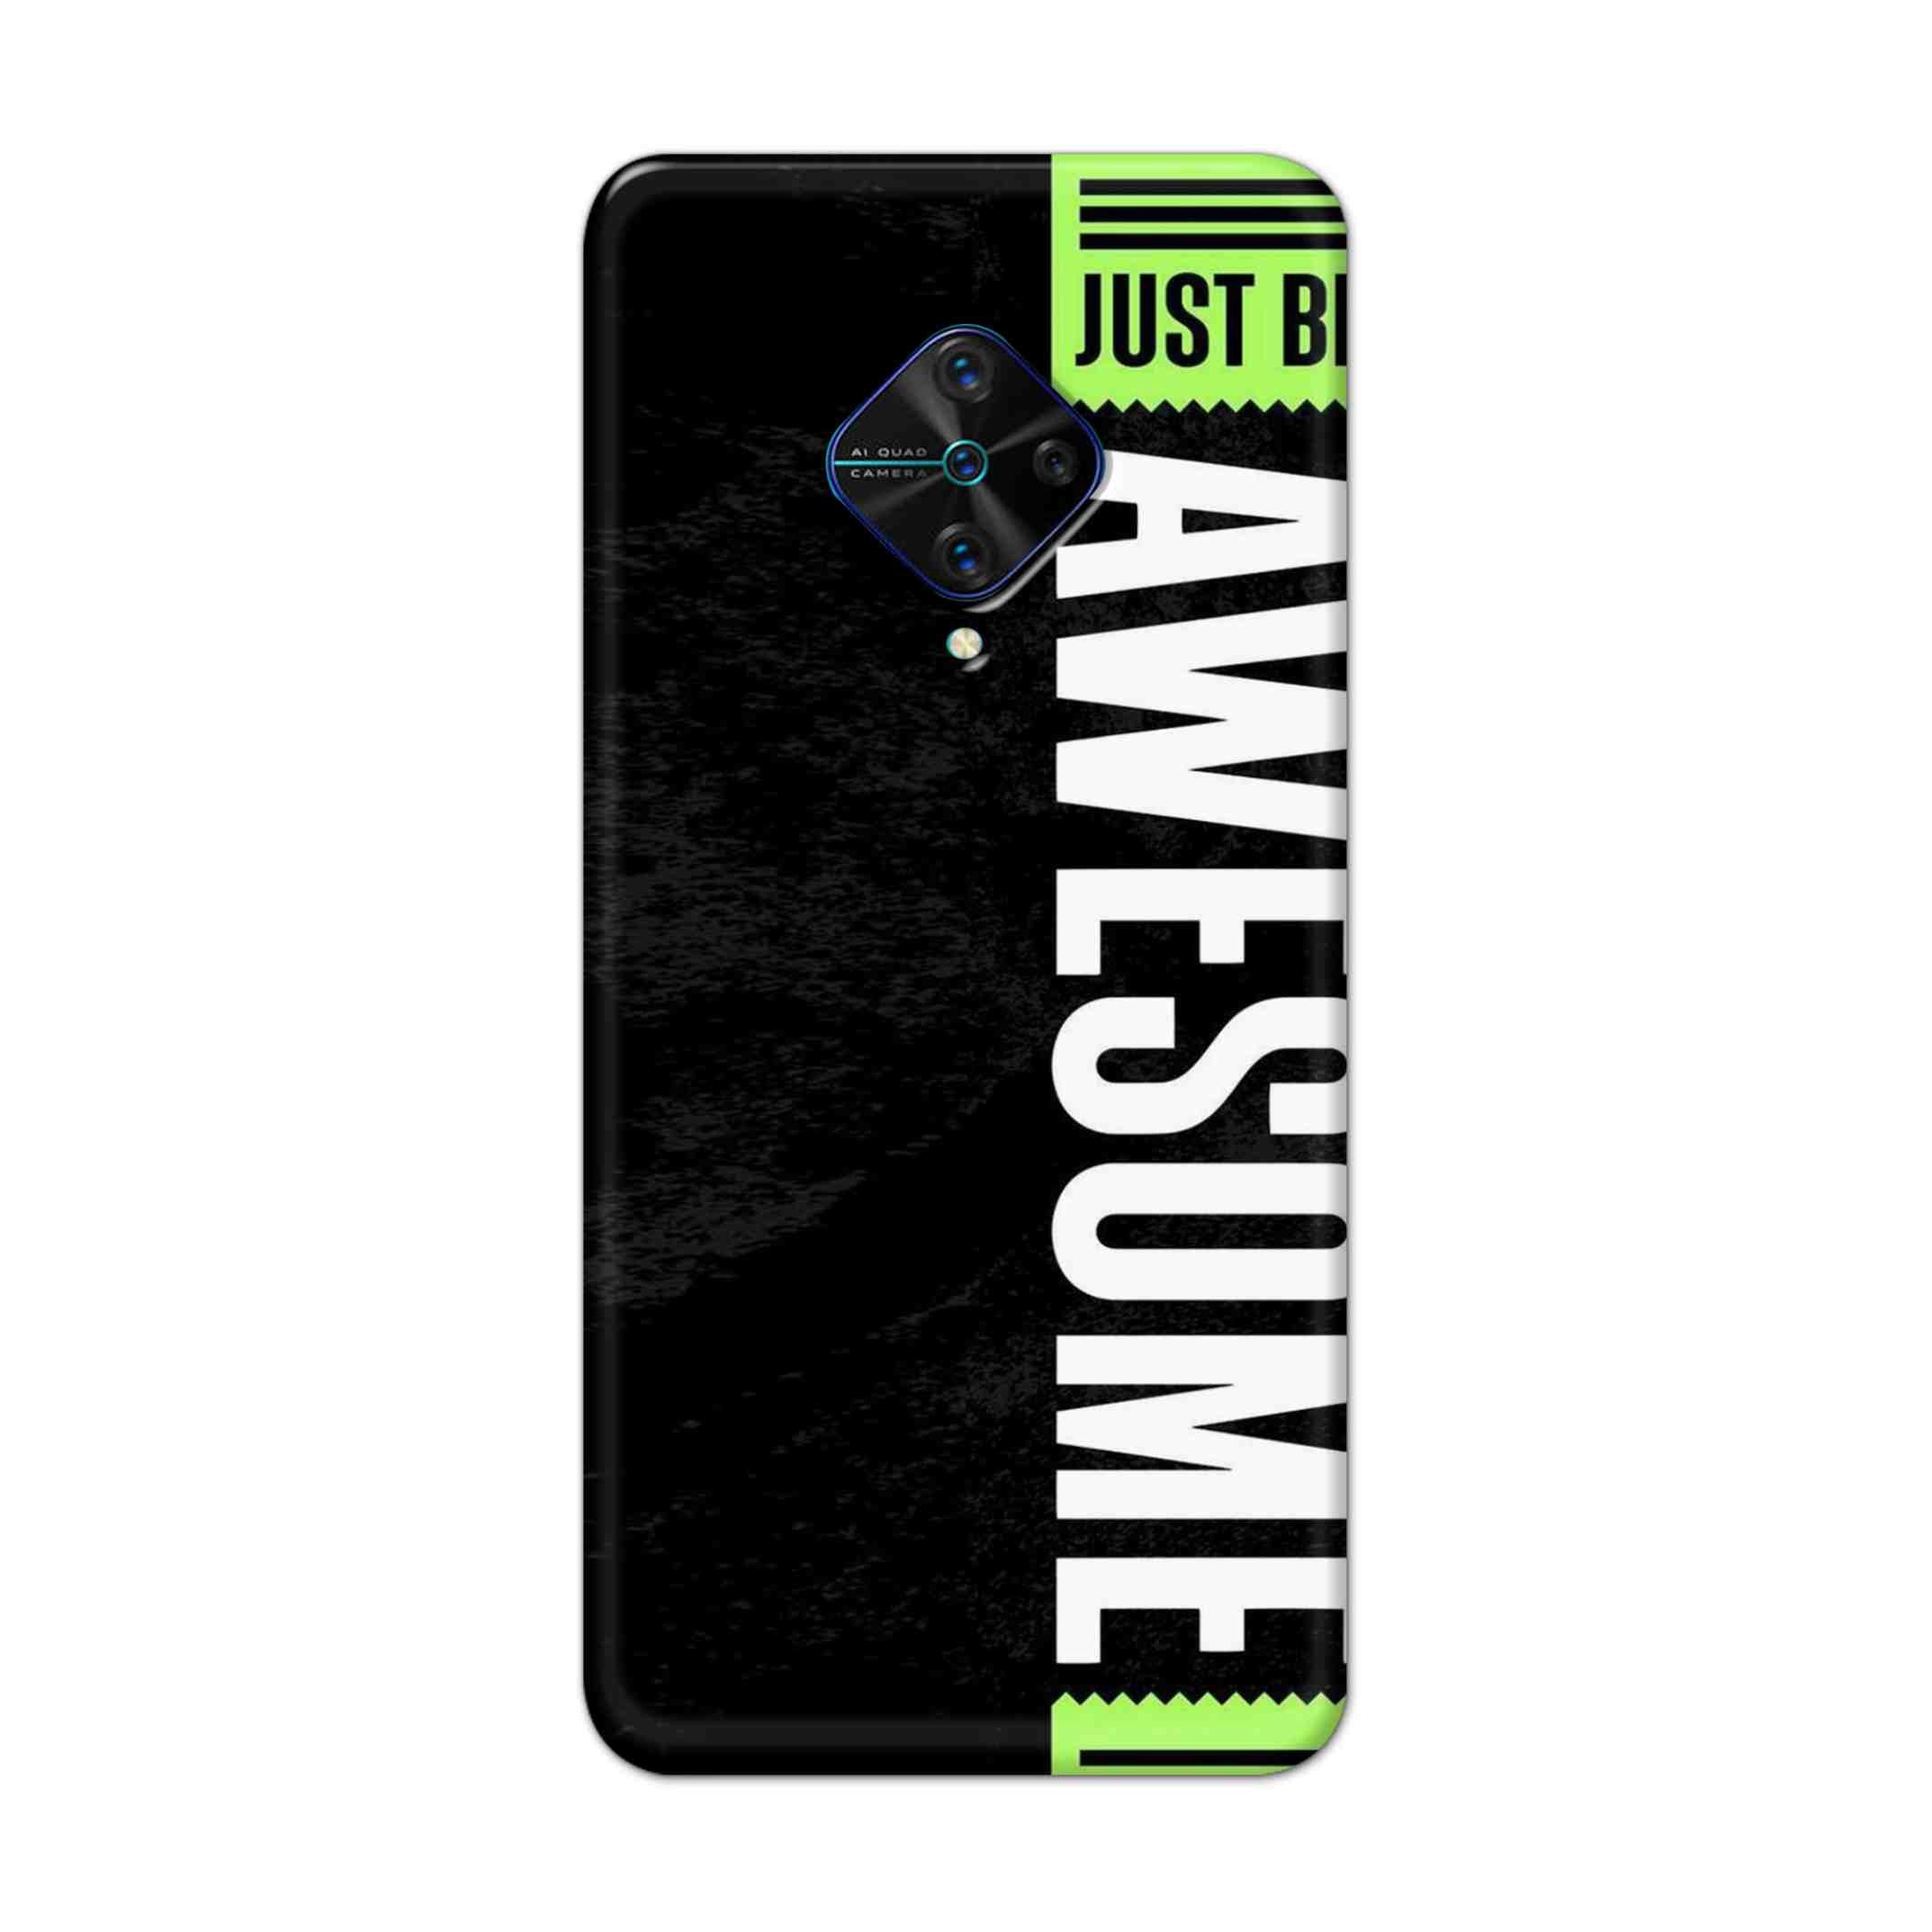 Buy Awesome Street Hard Back Mobile Phone Case Cover For Vivo S1 Pro Online